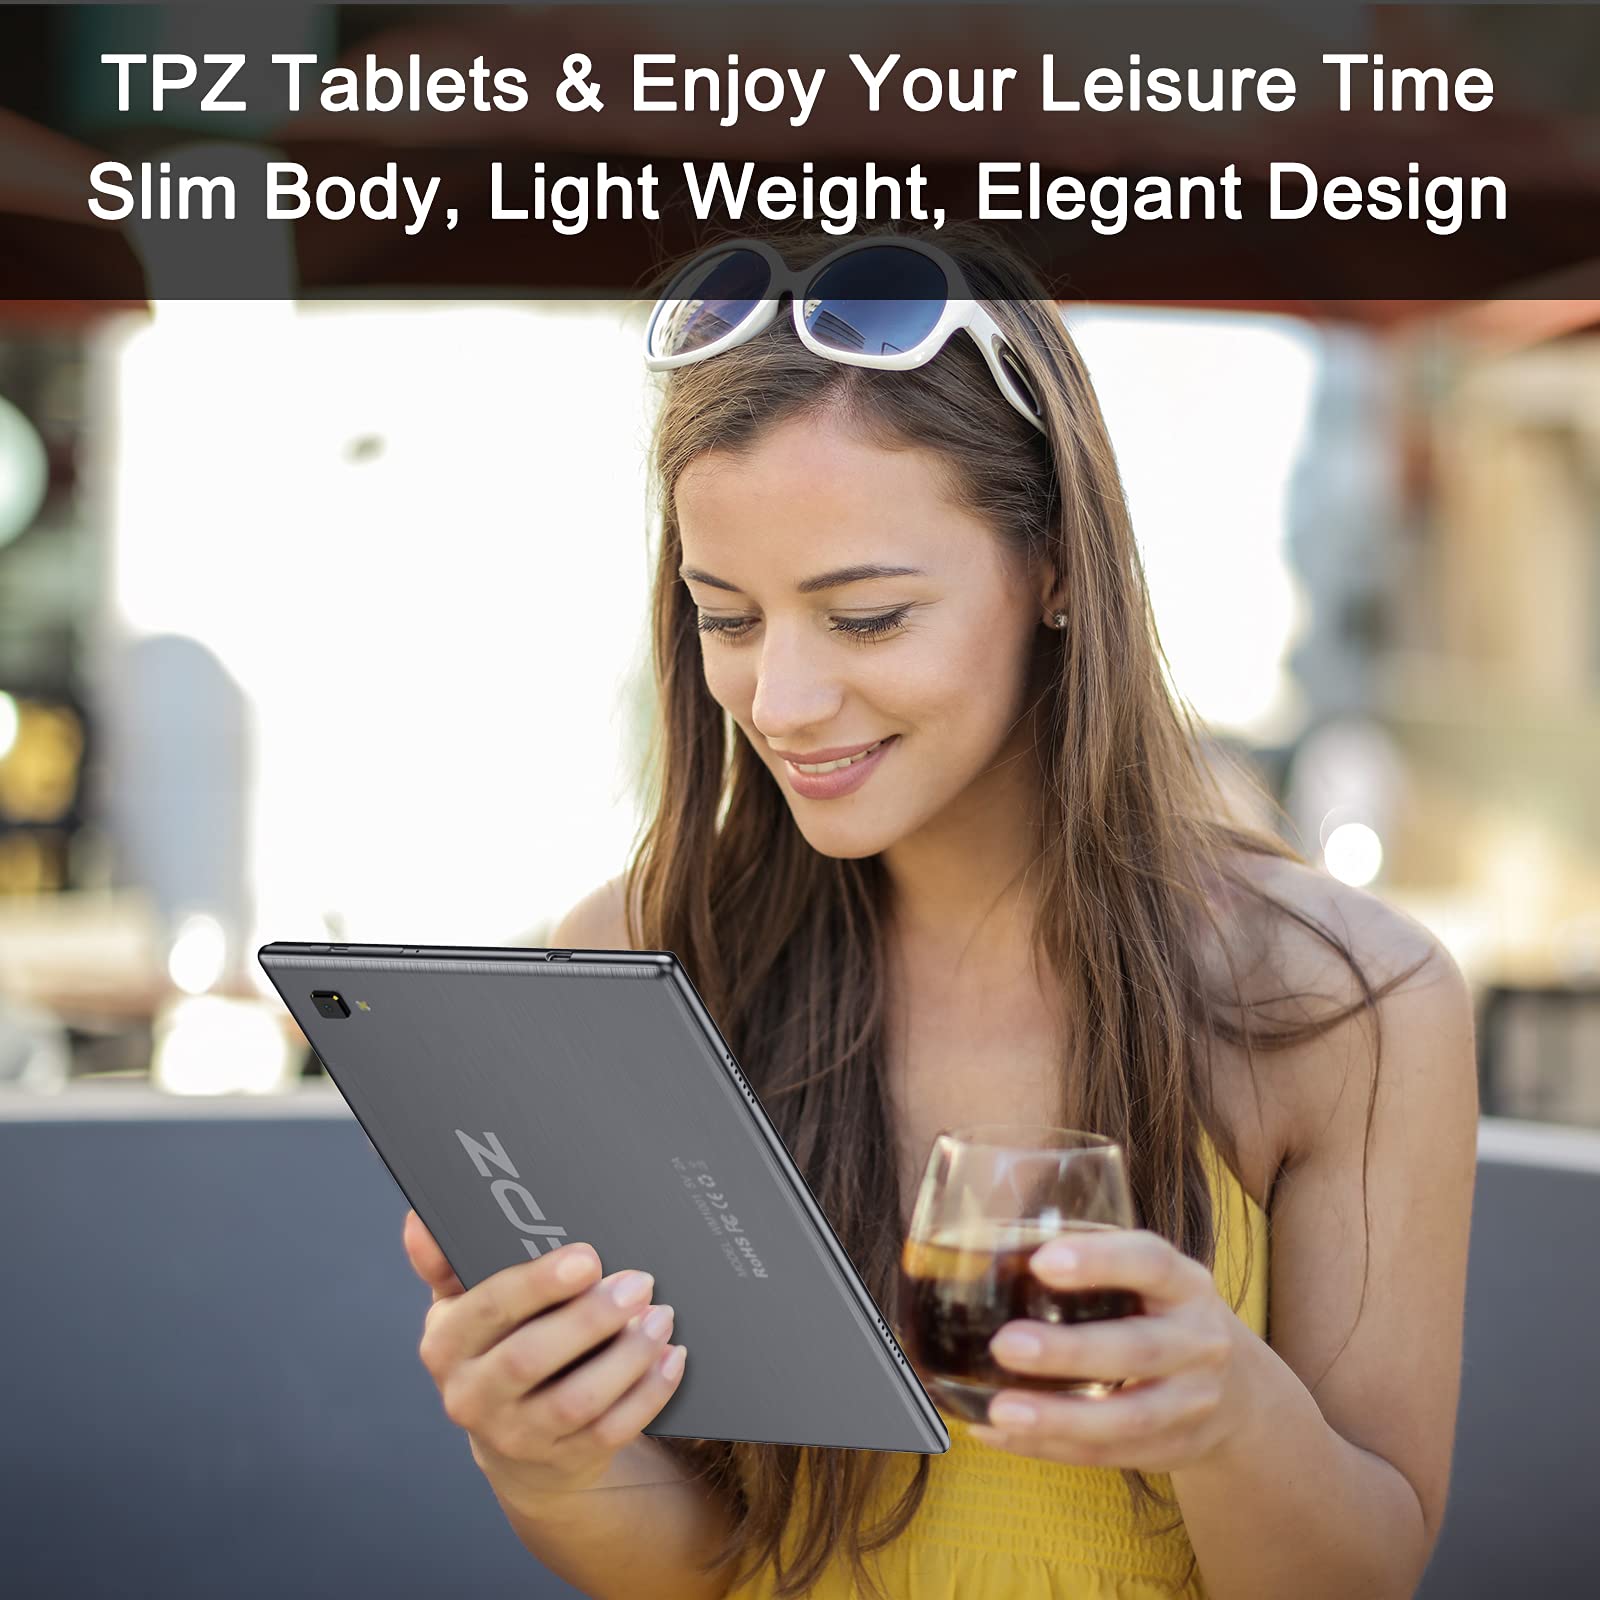 TPZ Tablet 10 Inch Android Tablet, 2023 Latest Octa-Core 32GB Storage Tablet Computer, 6000mAh Battery, Dual 13MP+5MP Camera, WiFi, Bluetooth, GPS, 128GB Expand Support, IPS Full HD Display-Grey